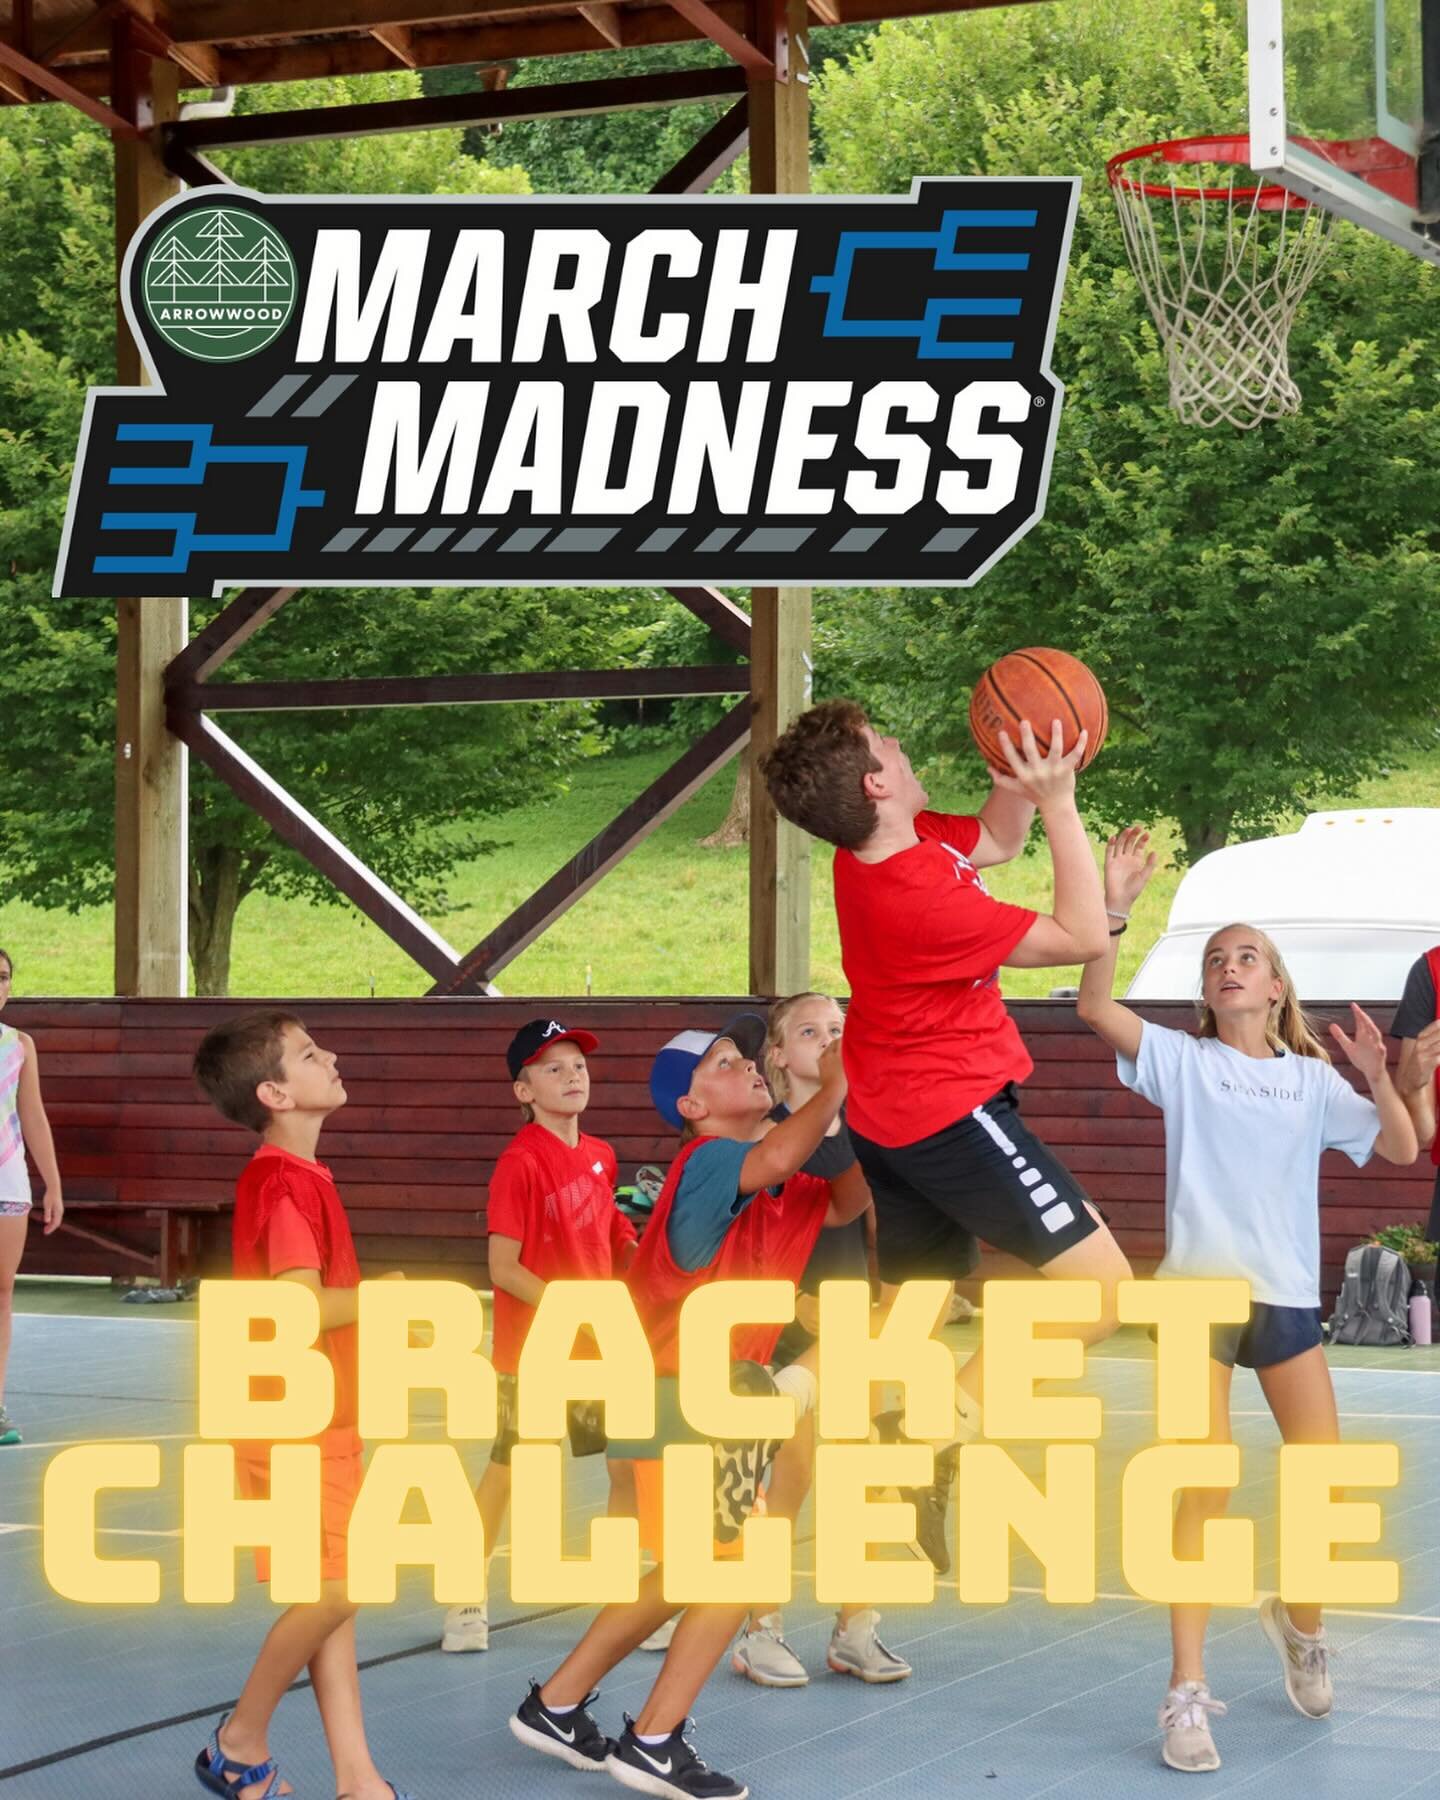 🏀Arrowwood Bracket Challenge! Enter today 🏀

 🌟 Prizes? YES! Beanies and exclusives to the top 2 finishers. Coffee mug, sweatshirt etc.  Stay tuned!!!

🎁 Beat Mr. Seth, and you&rsquo;ll score an exclusive, one-of-a-kind limited edition sticker!

